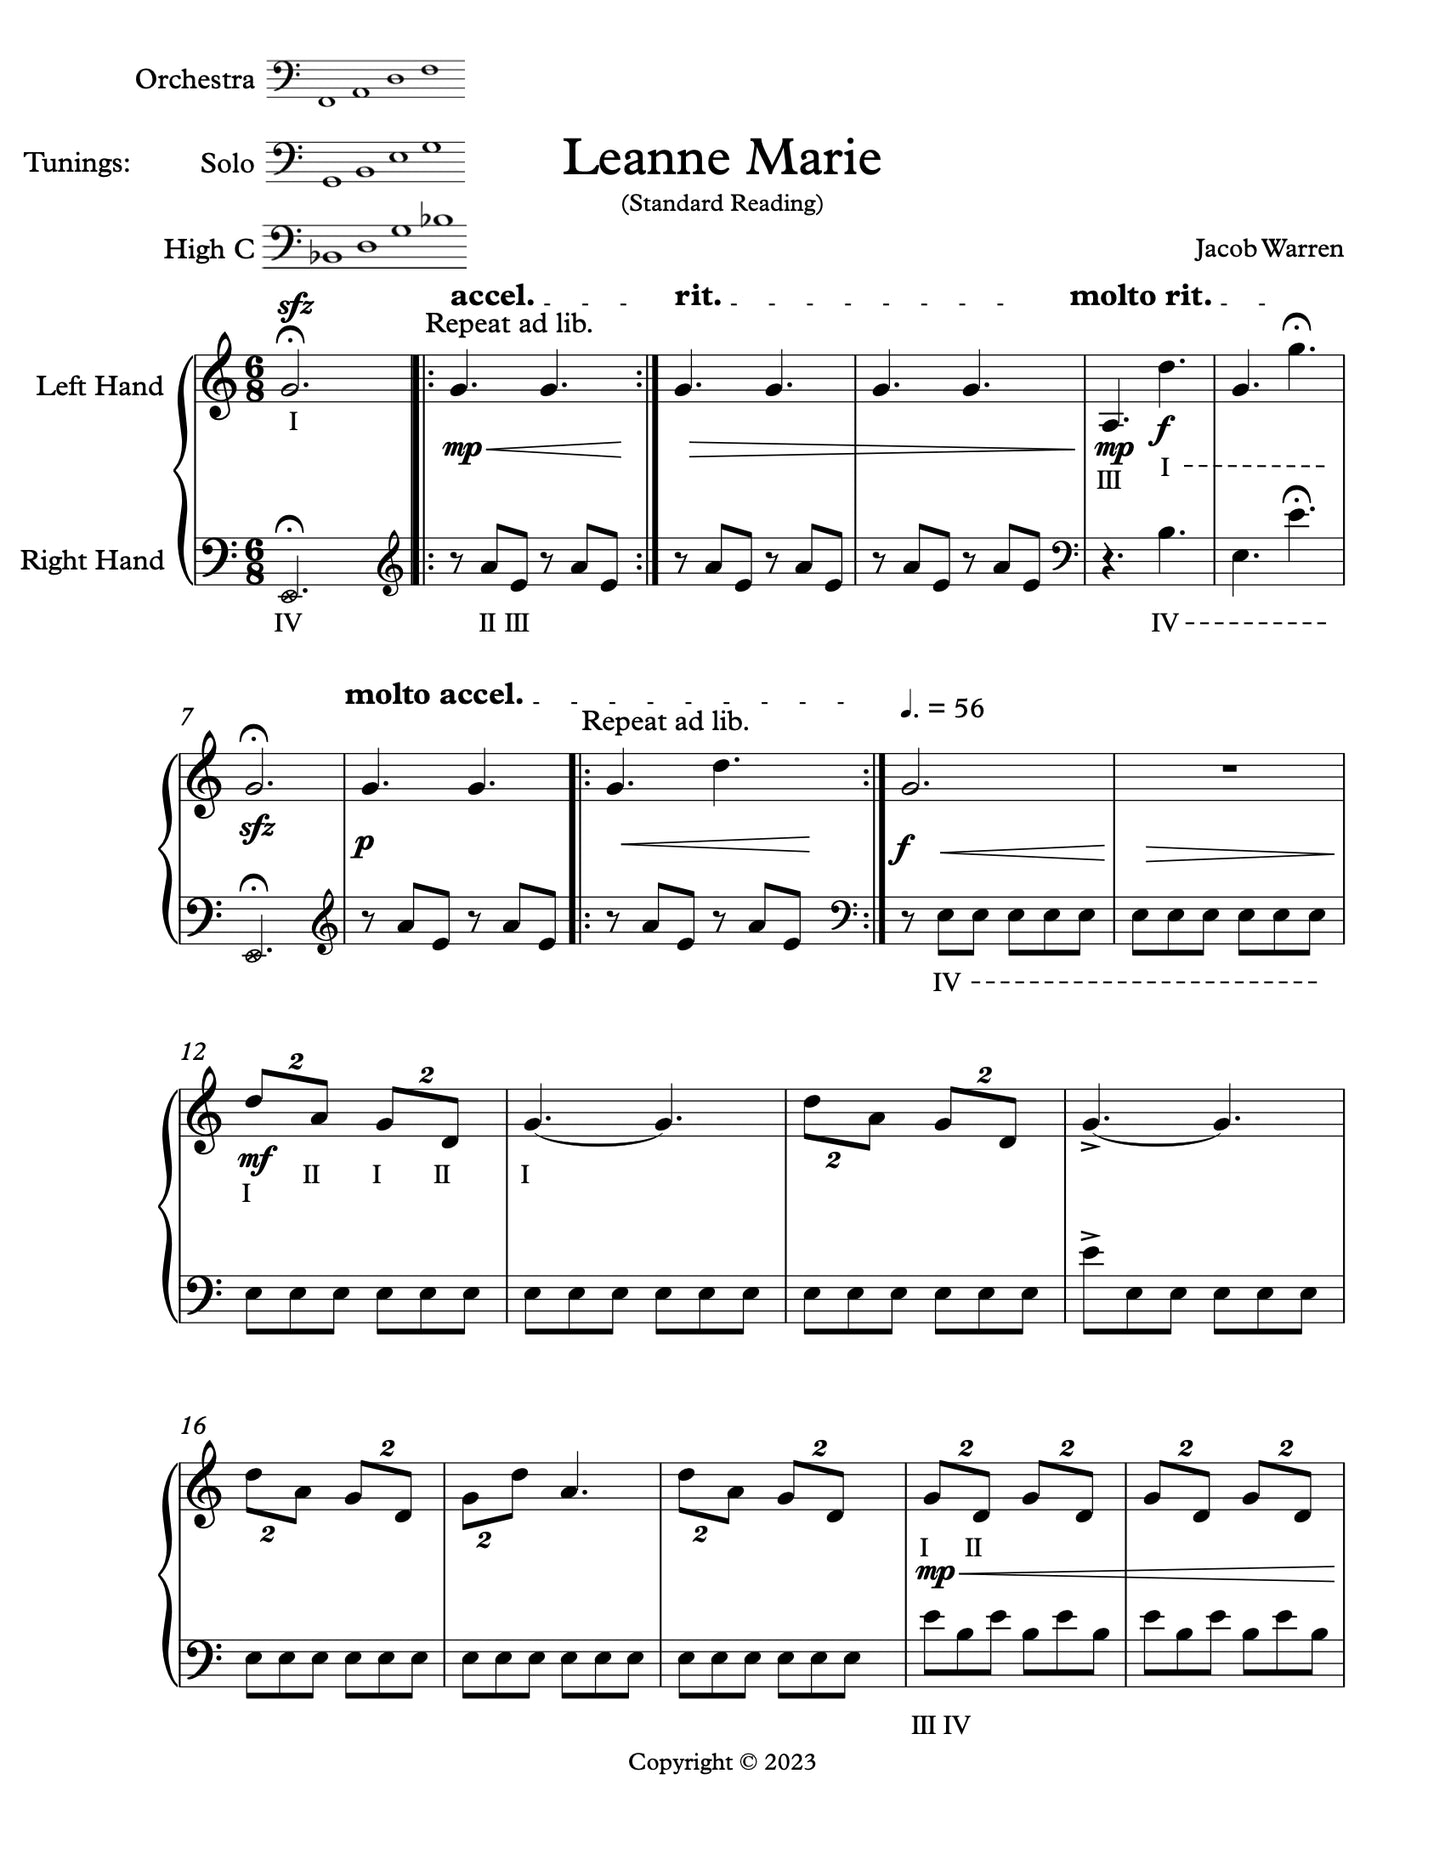 Jacob Warren: "Leanne Marie" for Solo Double Bass (orchestral, solo and high C tunings)